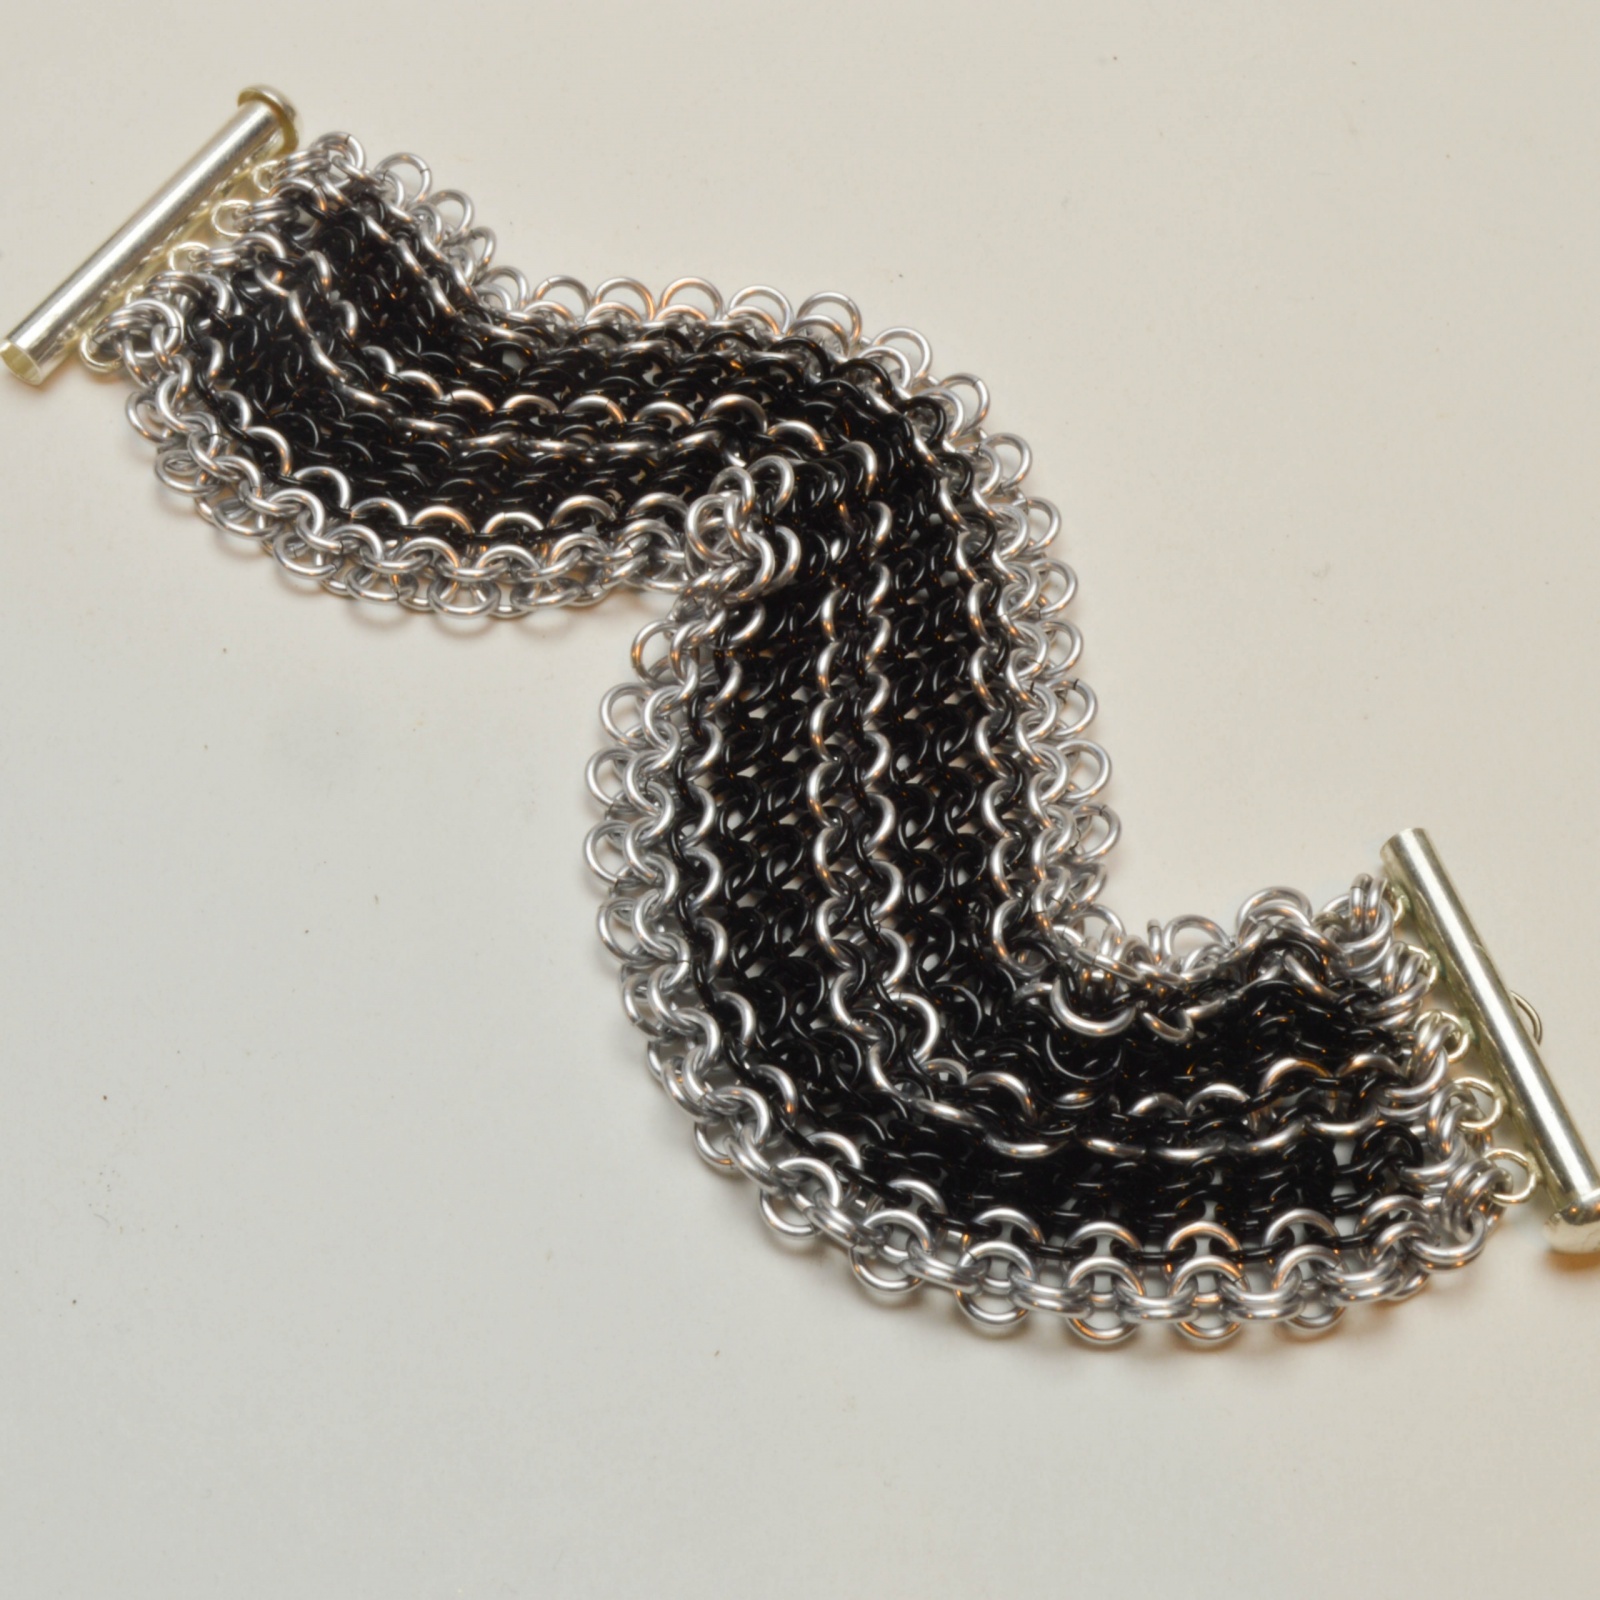 Black and Silver Anodized Aluminum Wide Chainmaille Bracelet